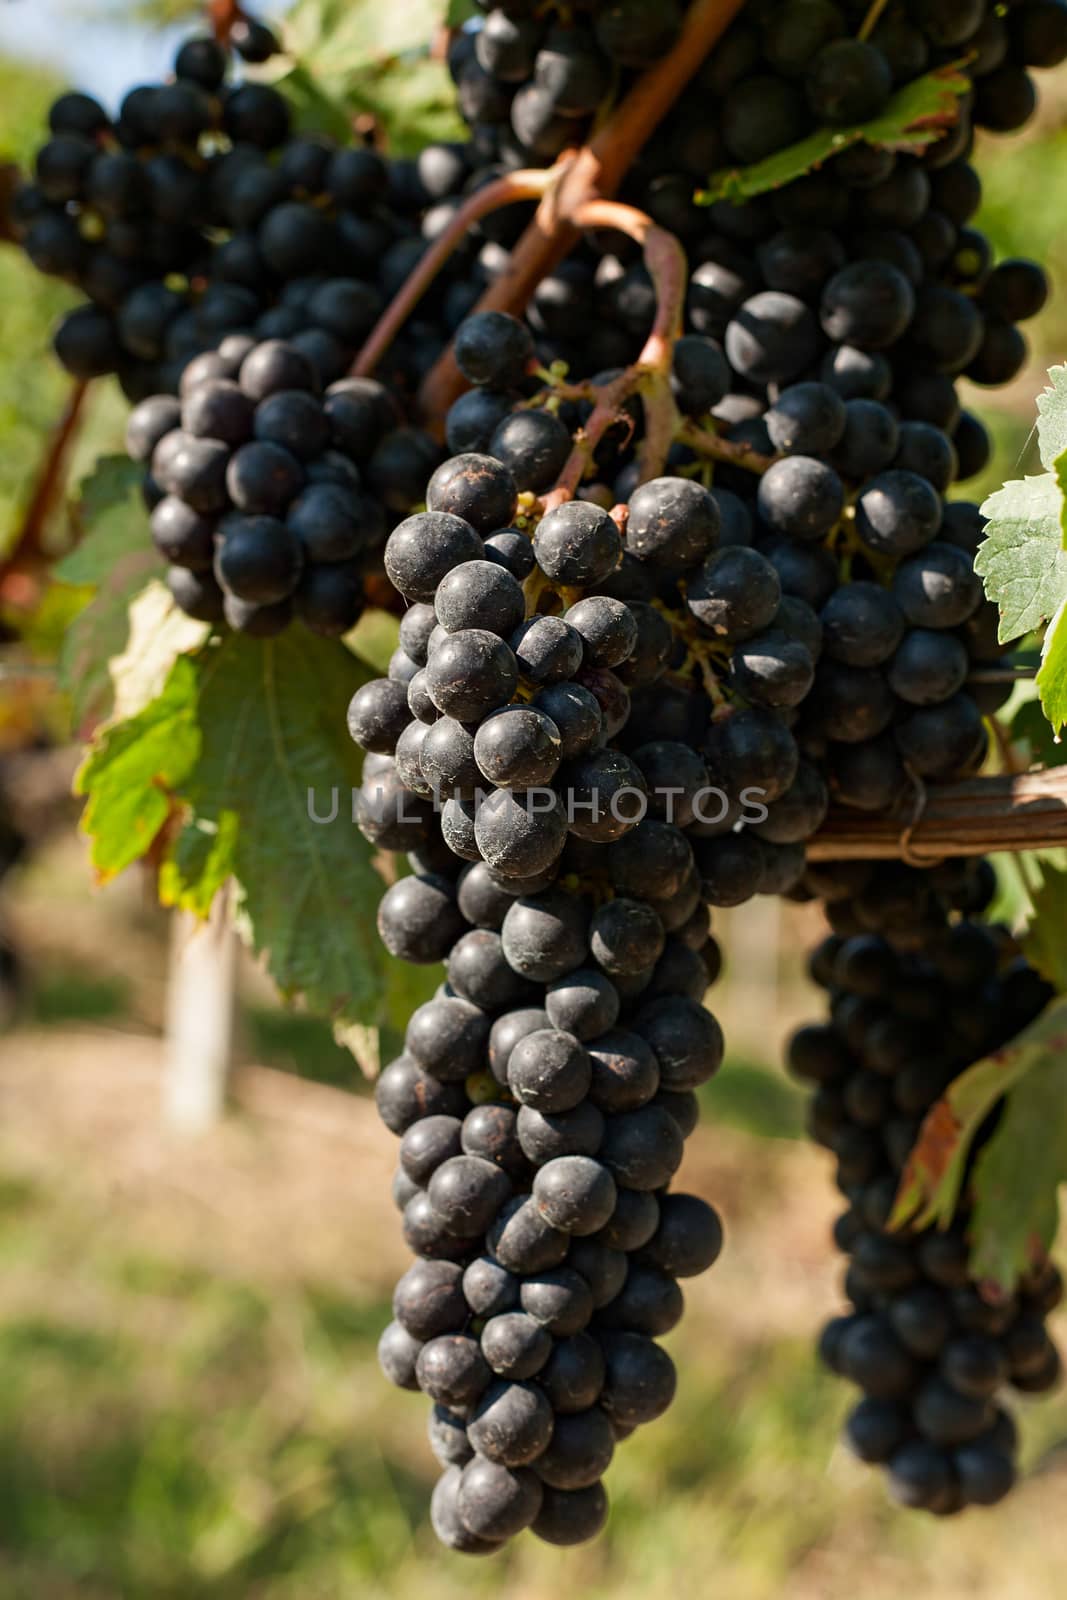 Bunches of red grapes in the vineyard during a sunny day